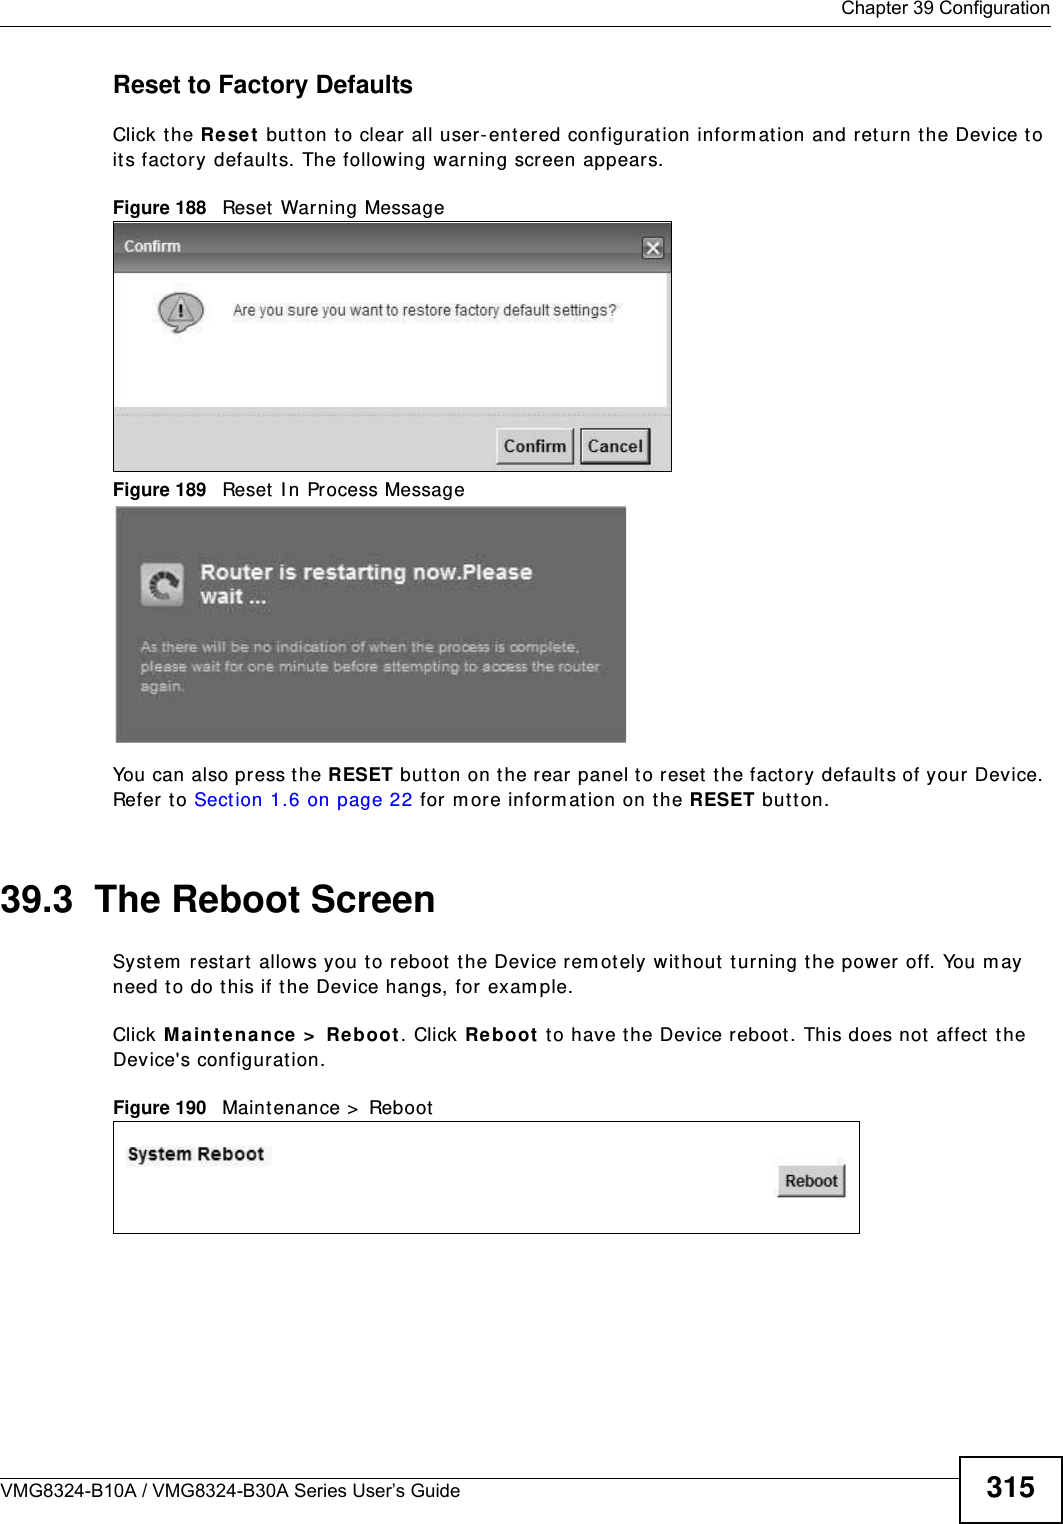  Chapter 39 ConfigurationVMG8324-B10A / VMG8324-B30A Series User’s Guide 315Reset to Factory Defaults  Click the Re se t  butt on to clear all user-entered configuration inform ation and ret urn the Device to it s factory defaults. The following warning screen appears.Figure 188   Reset Warning MessageFigure 189   Reset I n Pr ocess MessageYou can also press the RESET butt on on t he rear panel to reset  t he factory defaults of your Device. Refer t o Sect ion 1.6 on page 22 for m ore inform ation on the RESET butt on.39.3  The Reboot Screen Syst em  restart  allows you to reboot  t he Device rem ot ely without  t ur ning the power off. You may need t o do this if t he Device hangs, for exam ple.Click Ma int ena nce &gt;  Reboot. Click Reboo t  to have the Device reboot. This does not affect  t he Device&apos;s configurat ion. Figure 190   Maintenance &gt;  Reboot 